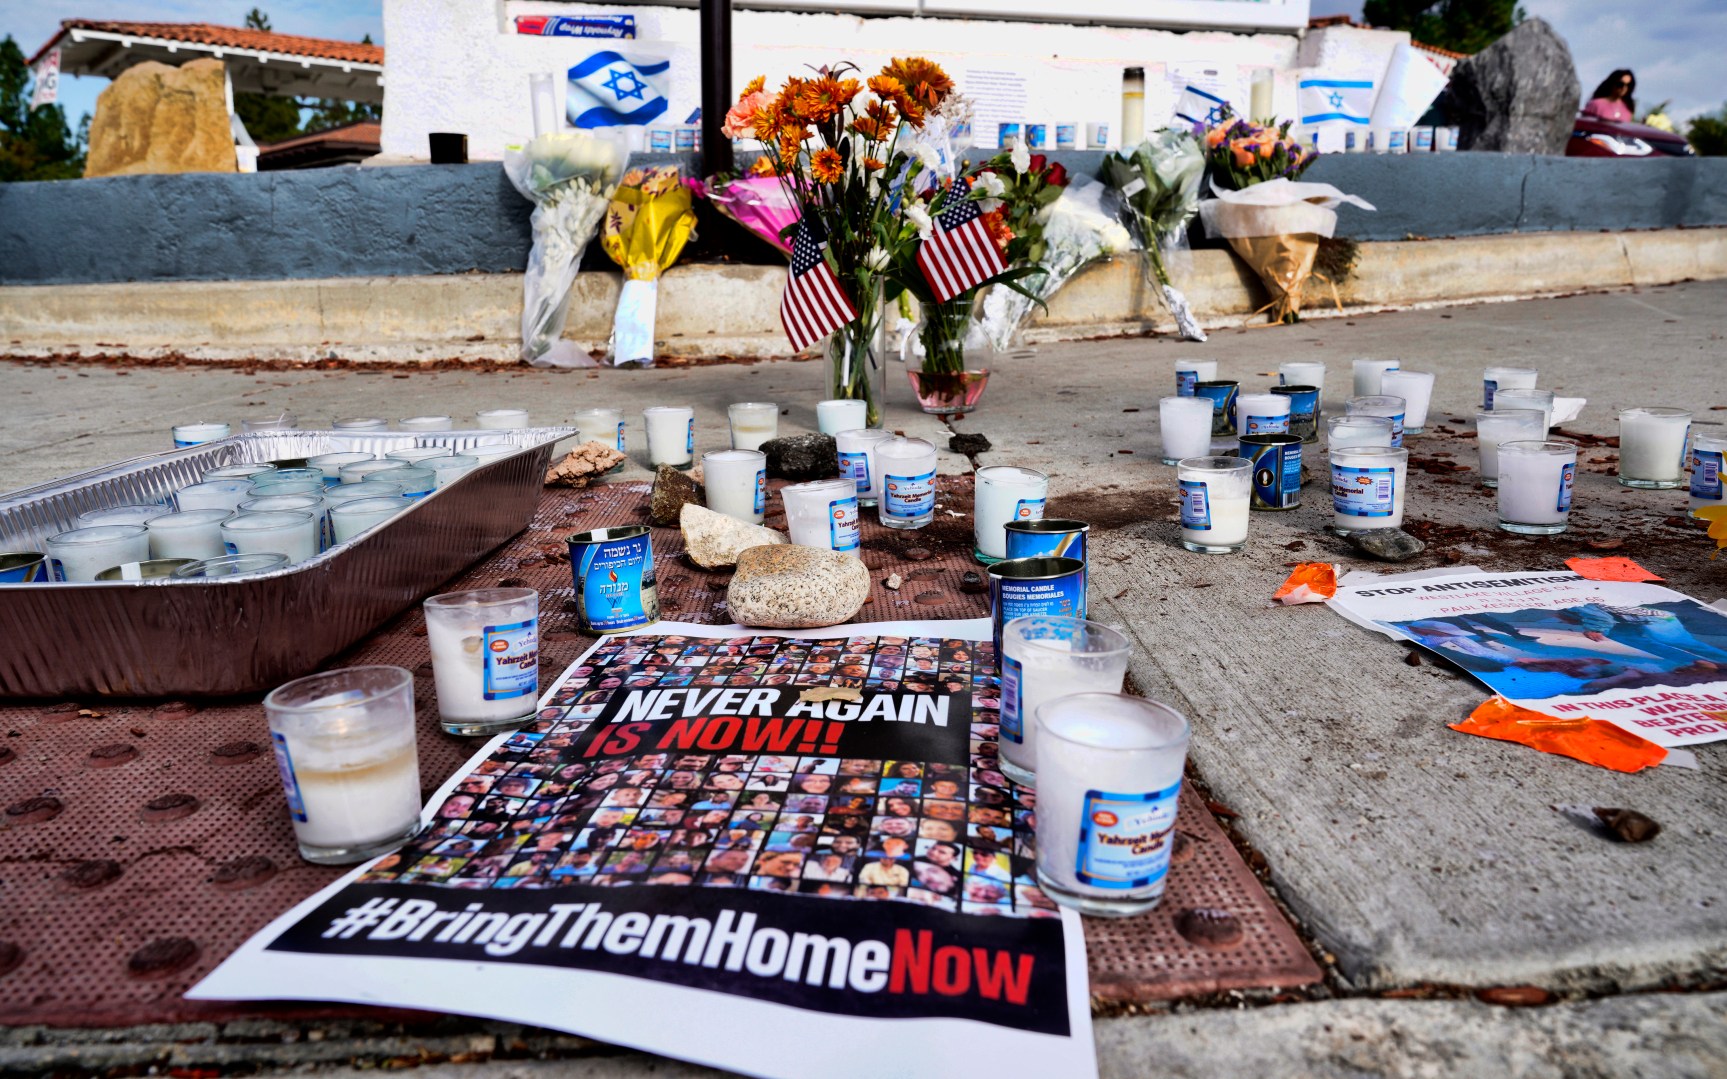 Flowers and candles are left at a makeshift shrine placed at the scene of a Sunday confrontation that lead to death of a demonstrator, Tuesday, Nov. 7, 2023, in Thousand Oaks, Calif. Paul Kessler, 69, died at a hospital on Monday from a head injury after witnesses reported he was involved in a "physical altercation" during pro-Israel and pro-Palestinian demonstrations at an intersection in Thousand Oaks, a suburb northwest of Los Angeles, authorities said. (AP Photo/Richard Vogel)